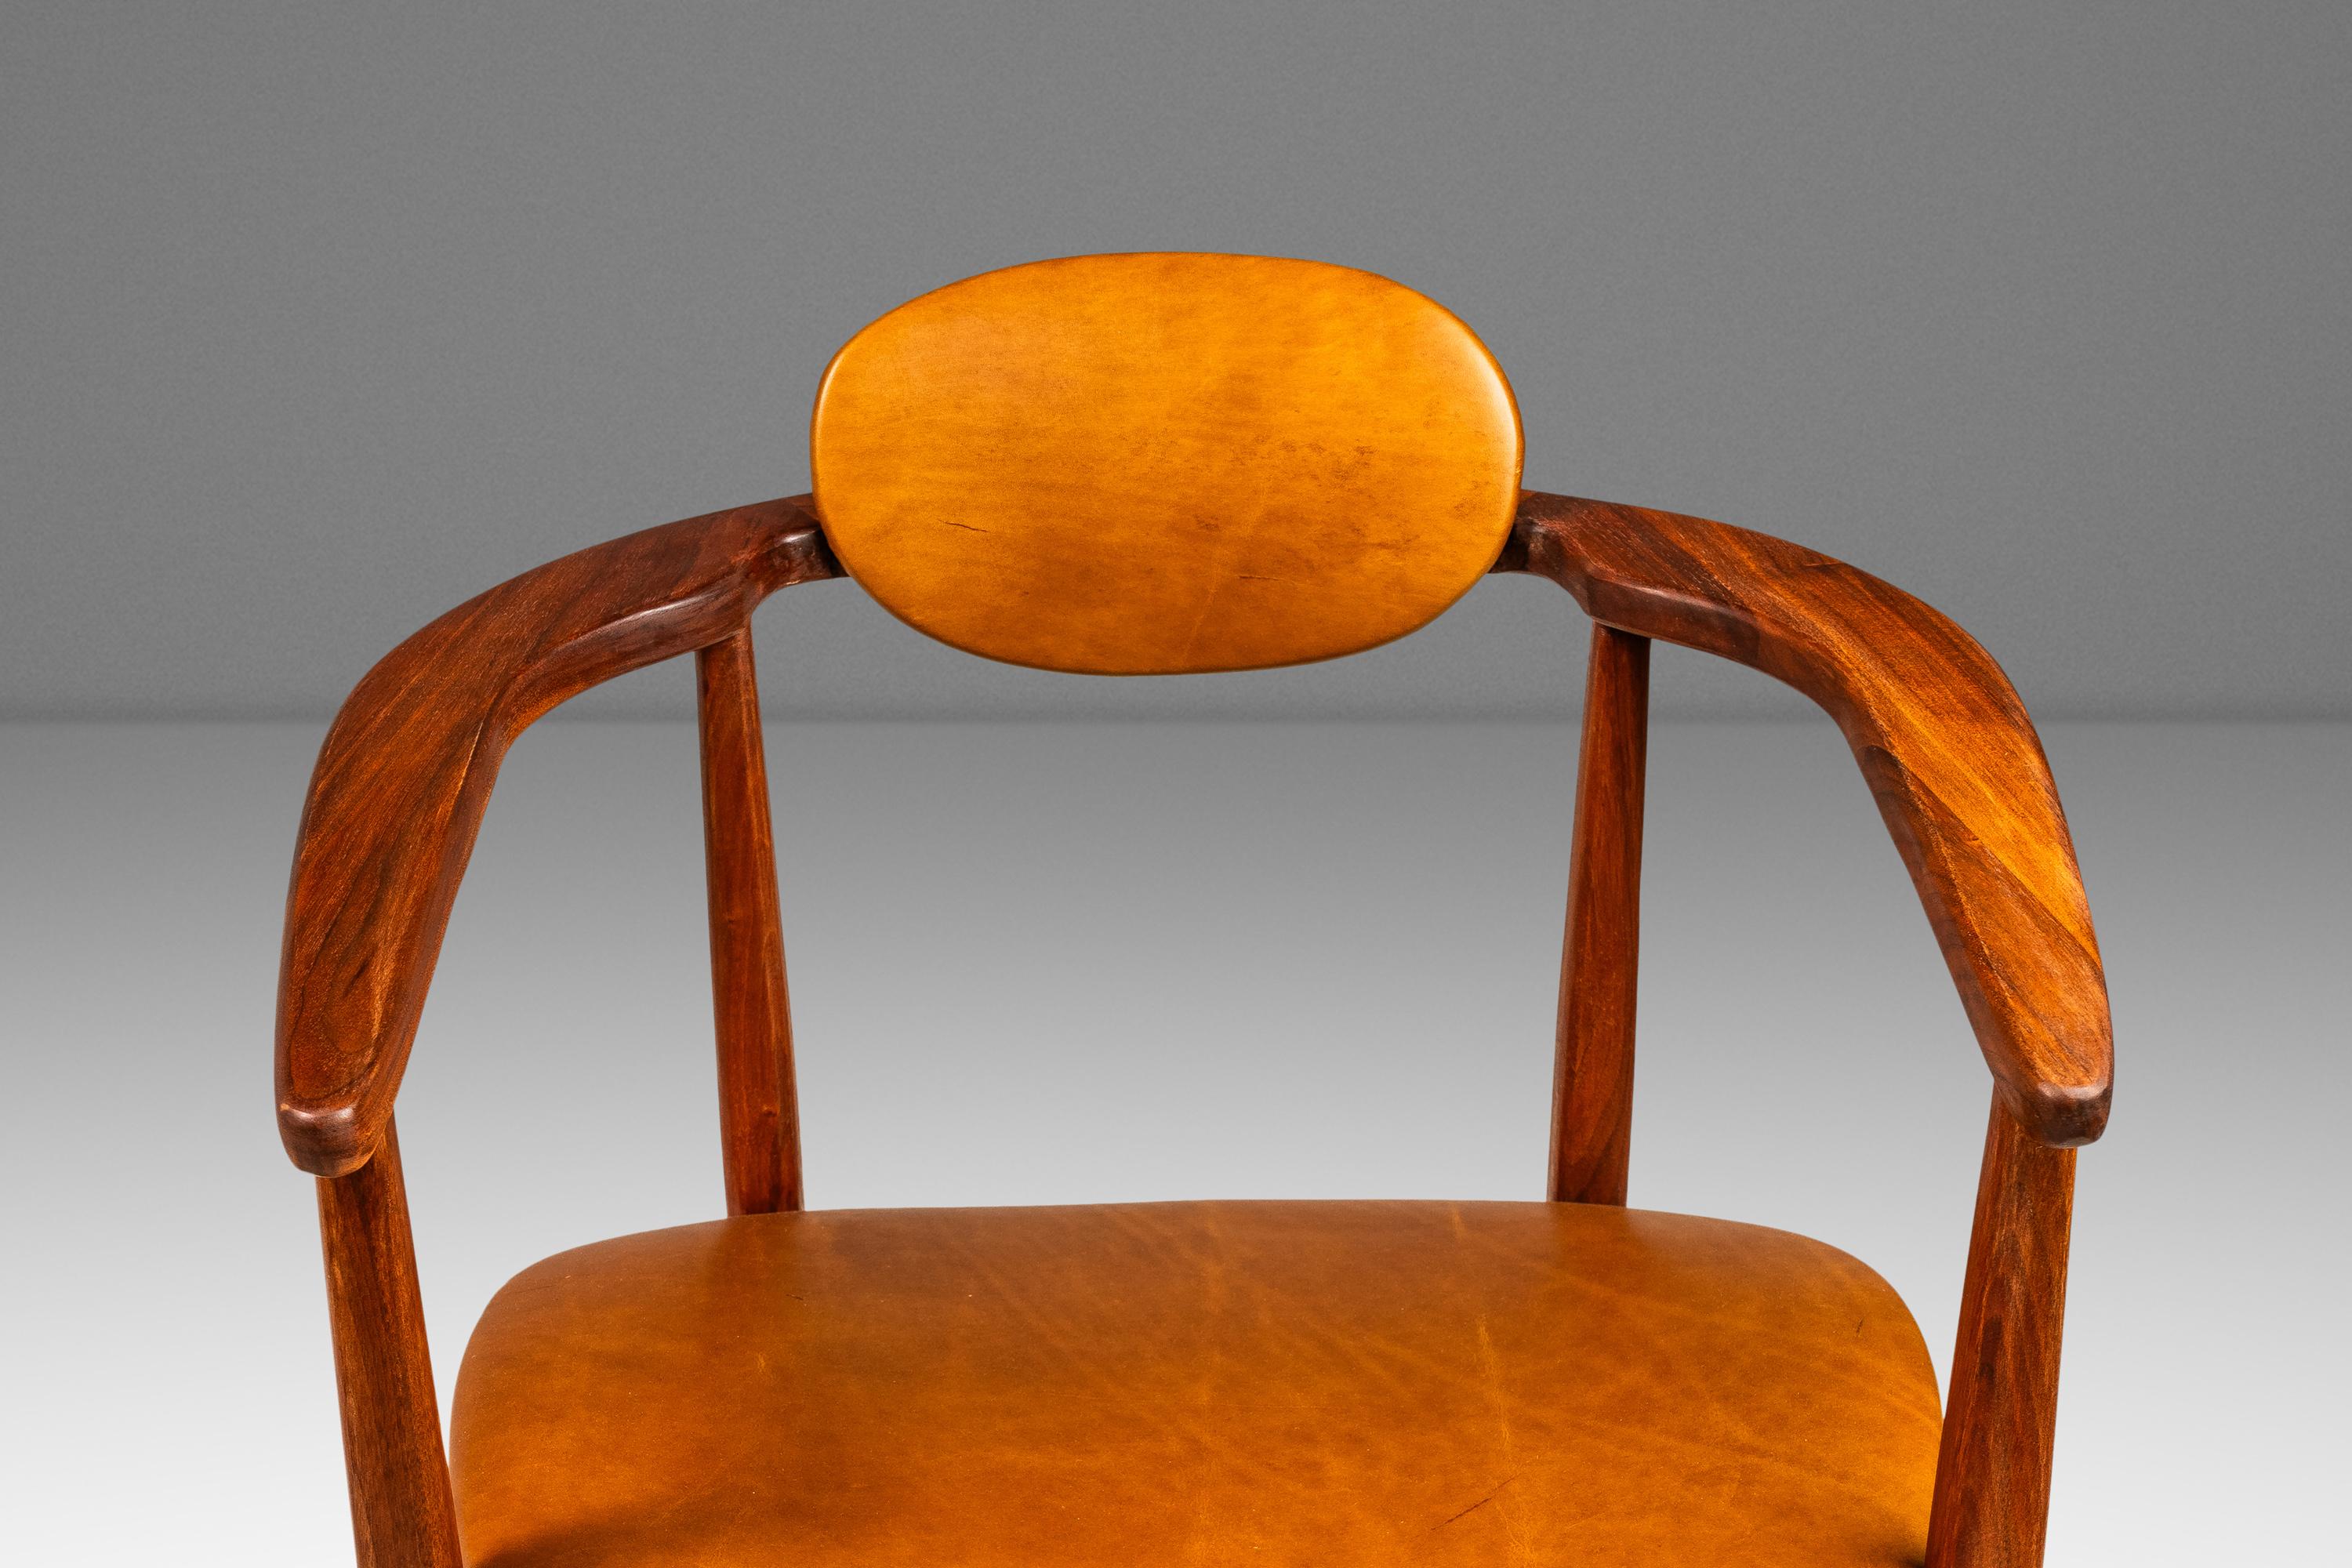 Set of 2 Sculptural Lounge Chairs, Leather & Walnut, Adrian Pearsall Style, 1960 For Sale 9